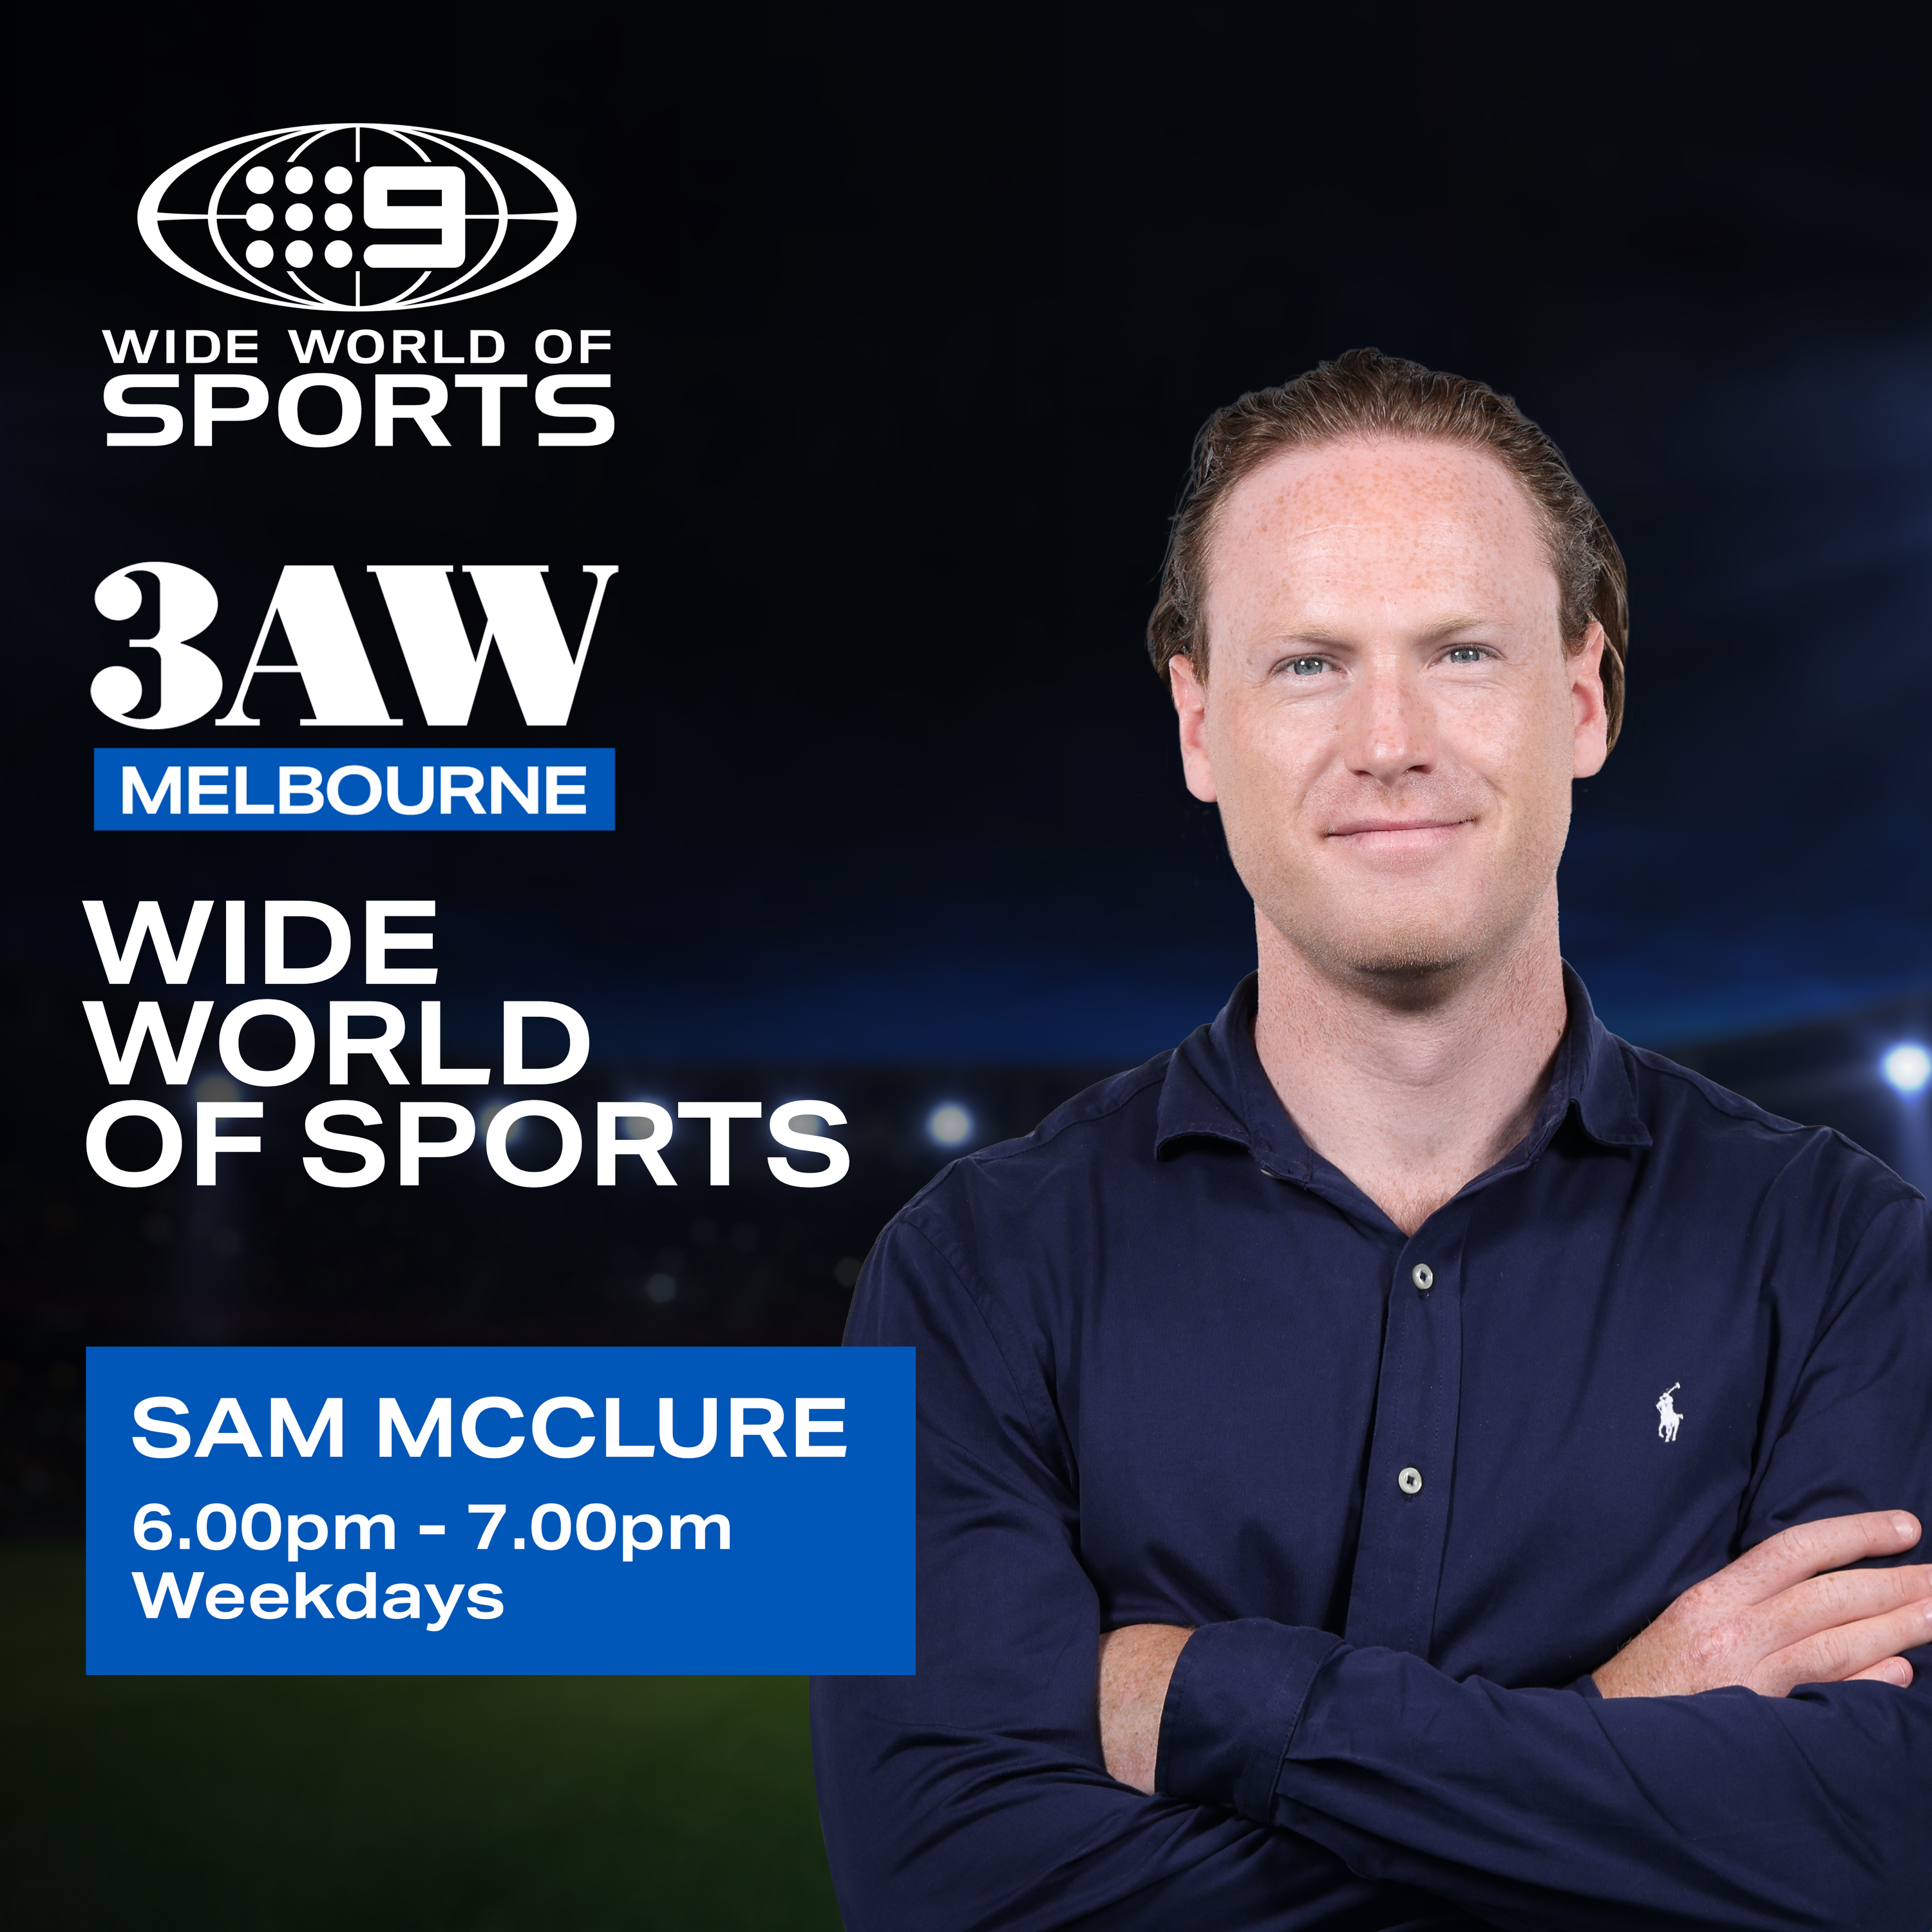 AFL clubs need to be very careful with pre-season messaging according to Sam McClure